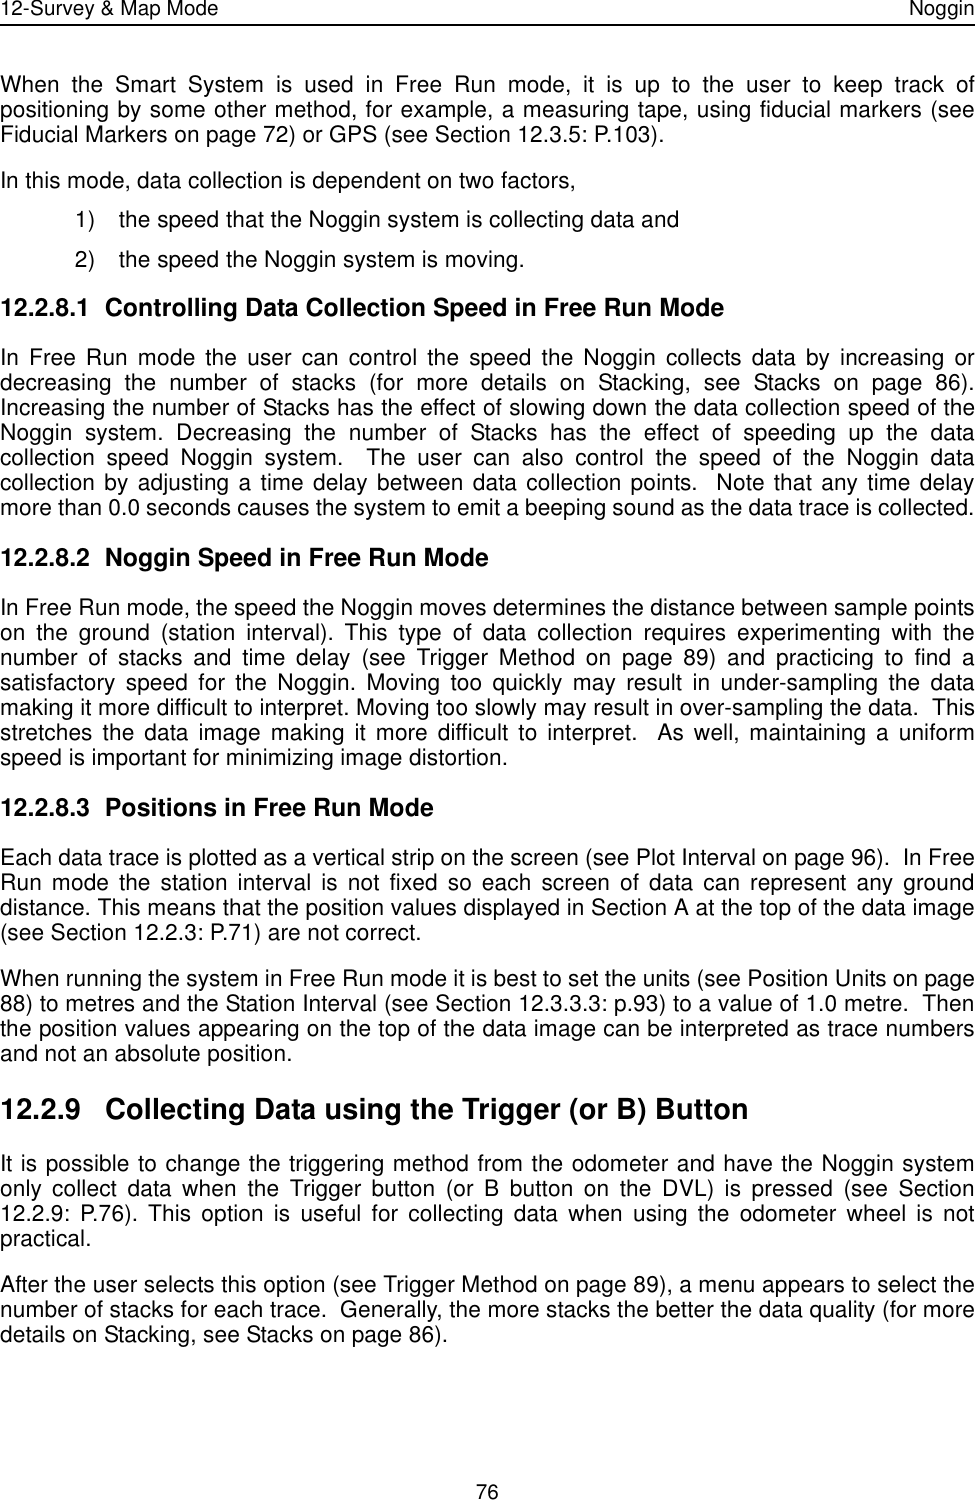 12-Survey &amp; Map Mode Noggin76When the Smart System is used in Free Run mode, it is up to the user to keep track ofpositioning by some other method, for example, a measuring tape, using fiducial markers (seeFiducial Markers on page 72) or GPS (see Section 12.3.5: P.103).In this mode, data collection is dependent on two factors, 1) the speed that the Noggin system is collecting data and 2) the speed the Noggin system is moving.12.2.8.1 Controlling Data Collection Speed in Free Run ModeIn Free Run mode the user can control the speed the Noggin collects data by increasing ordecreasing the number of stacks (for more details on Stacking, see Stacks on page 86).Increasing the number of Stacks has the effect of slowing down the data collection speed of theNoggin system. Decreasing the number of Stacks has the effect of speeding up the datacollection speed Noggin system.  The user can also control the speed of the Noggin datacollection by adjusting a time delay between data collection points.  Note that any time delaymore than 0.0 seconds causes the system to emit a beeping sound as the data trace is collected.12.2.8.2 Noggin Speed in Free Run ModeIn Free Run mode, the speed the Noggin moves determines the distance between sample pointson the ground (station interval). This type of data collection requires experimenting with thenumber of stacks and time delay (see Trigger Method on page 89) and practicing to find asatisfactory speed for the Noggin. Moving too quickly may result in under-sampling the datamaking it more difficult to interpret. Moving too slowly may result in over-sampling the data.  Thisstretches the data image making it more difficult to interpret.  As well, maintaining a uniformspeed is important for minimizing image distortion.12.2.8.3 Positions in Free Run ModeEach data trace is plotted as a vertical strip on the screen (see Plot Interval on page 96).  In FreeRun mode the station interval is not fixed so each screen of data can represent any grounddistance. This means that the position values displayed in Section A at the top of the data image(see Section 12.2.3: P.71) are not correct.  When running the system in Free Run mode it is best to set the units (see Position Units on page88) to metres and the Station Interval (see Section 12.3.3.3: p.93) to a value of 1.0 metre.  Thenthe position values appearing on the top of the data image can be interpreted as trace numbersand not an absolute position.12.2.9 Collecting Data using the Trigger (or B) ButtonIt is possible to change the triggering method from the odometer and have the Noggin systemonly collect data when the Trigger button (or B button on the DVL) is pressed (see Section12.2.9: P.76). This option is useful for collecting data when using the odometer wheel is notpractical. After the user selects this option (see Trigger Method on page 89), a menu appears to select thenumber of stacks for each trace.  Generally, the more stacks the better the data quality (for moredetails on Stacking, see Stacks on page 86).  